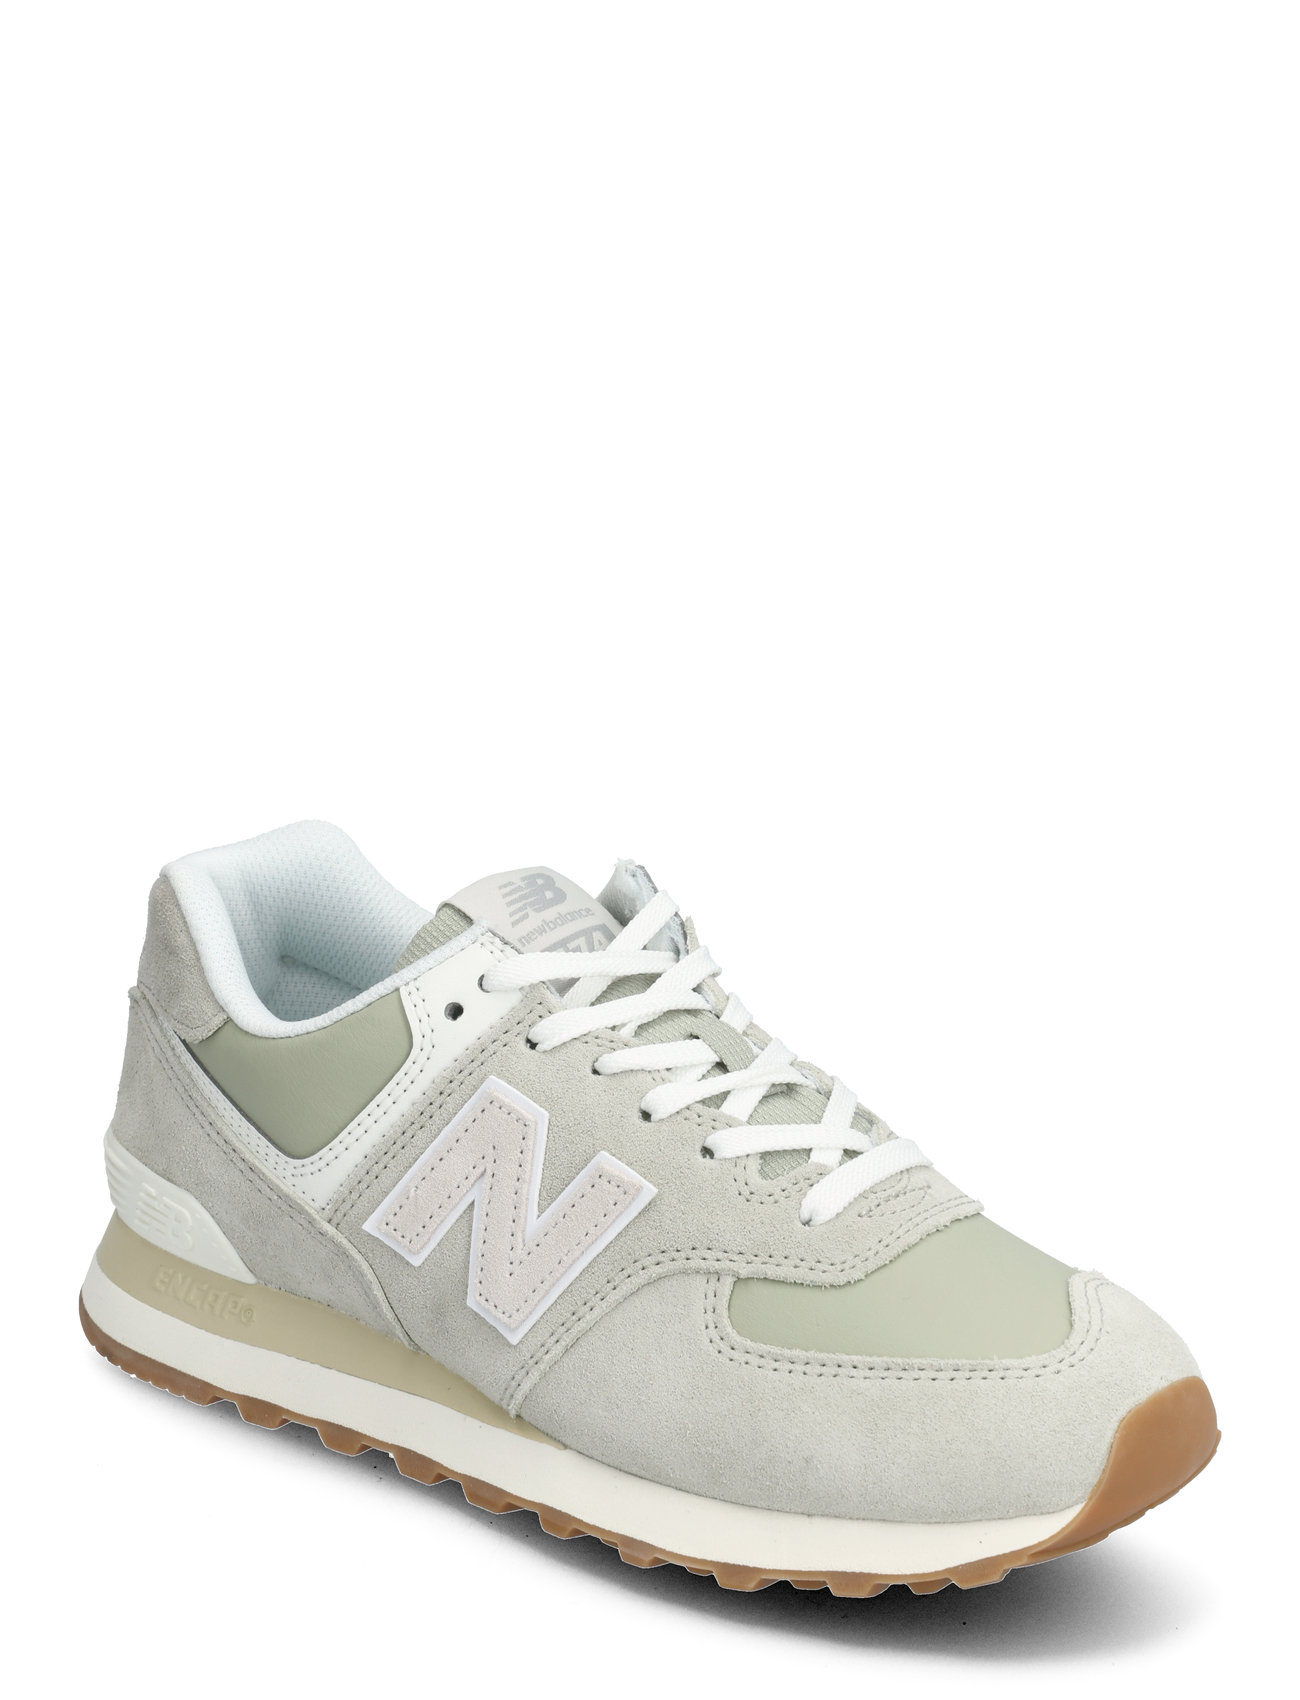 New Balance 574 Sport Sneakers Low-top Sneakers Green New Balance